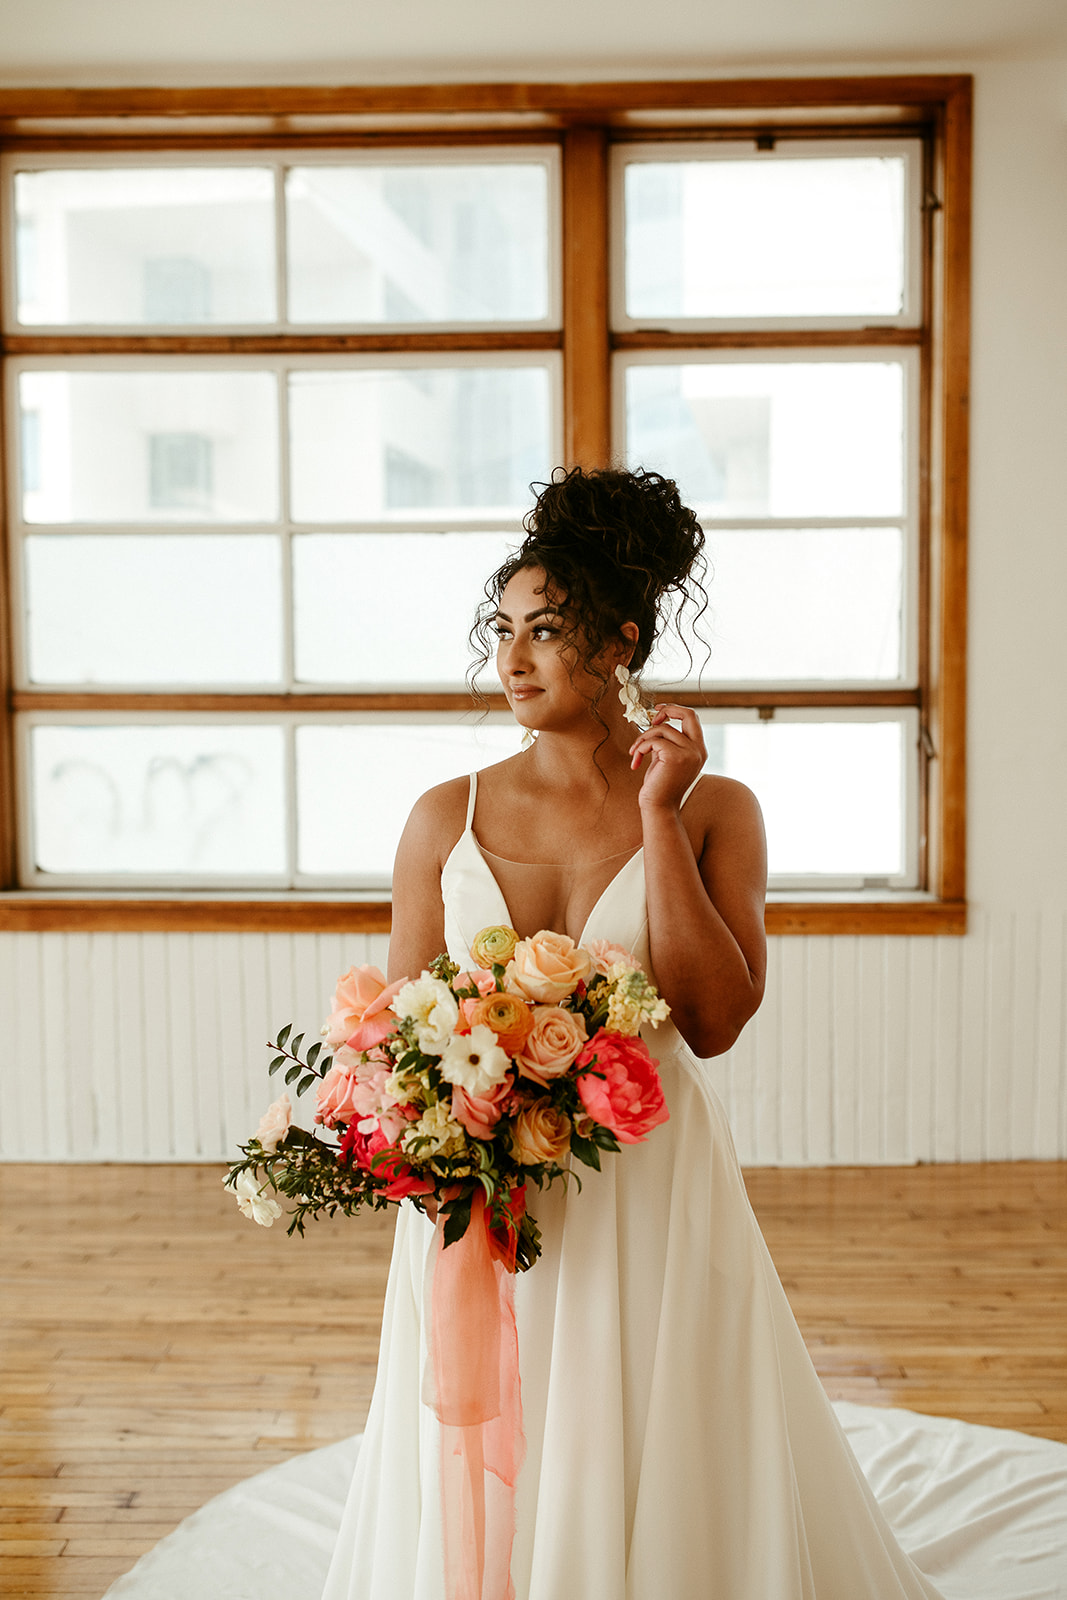 Bold bridal boho updo for the bride with curly hair